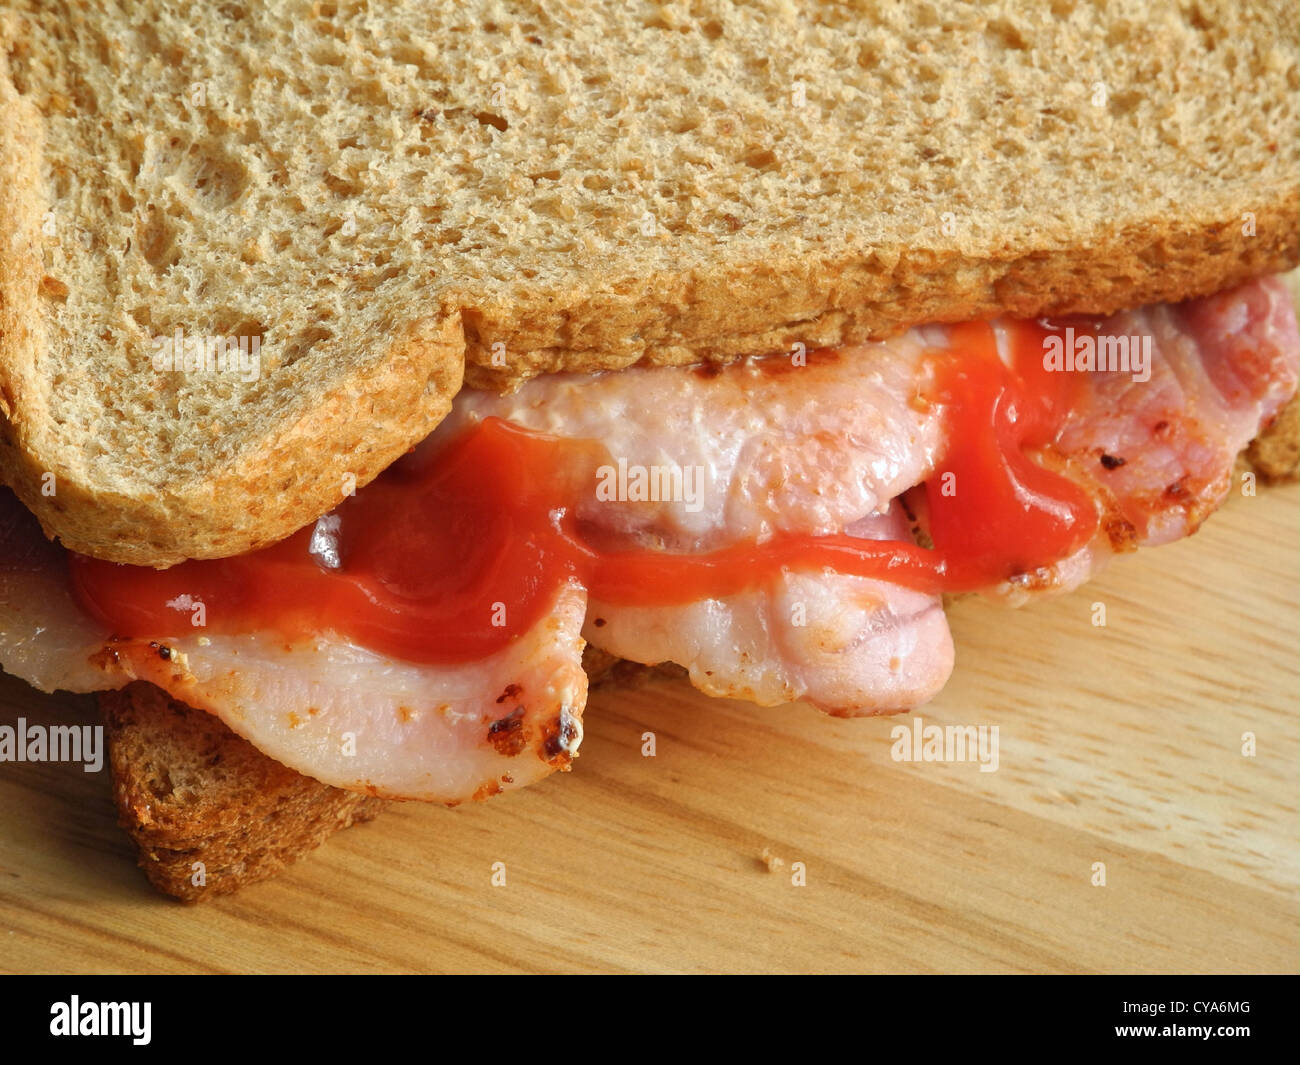 A Bacon Sandwich with tomato sauce Stock Photo